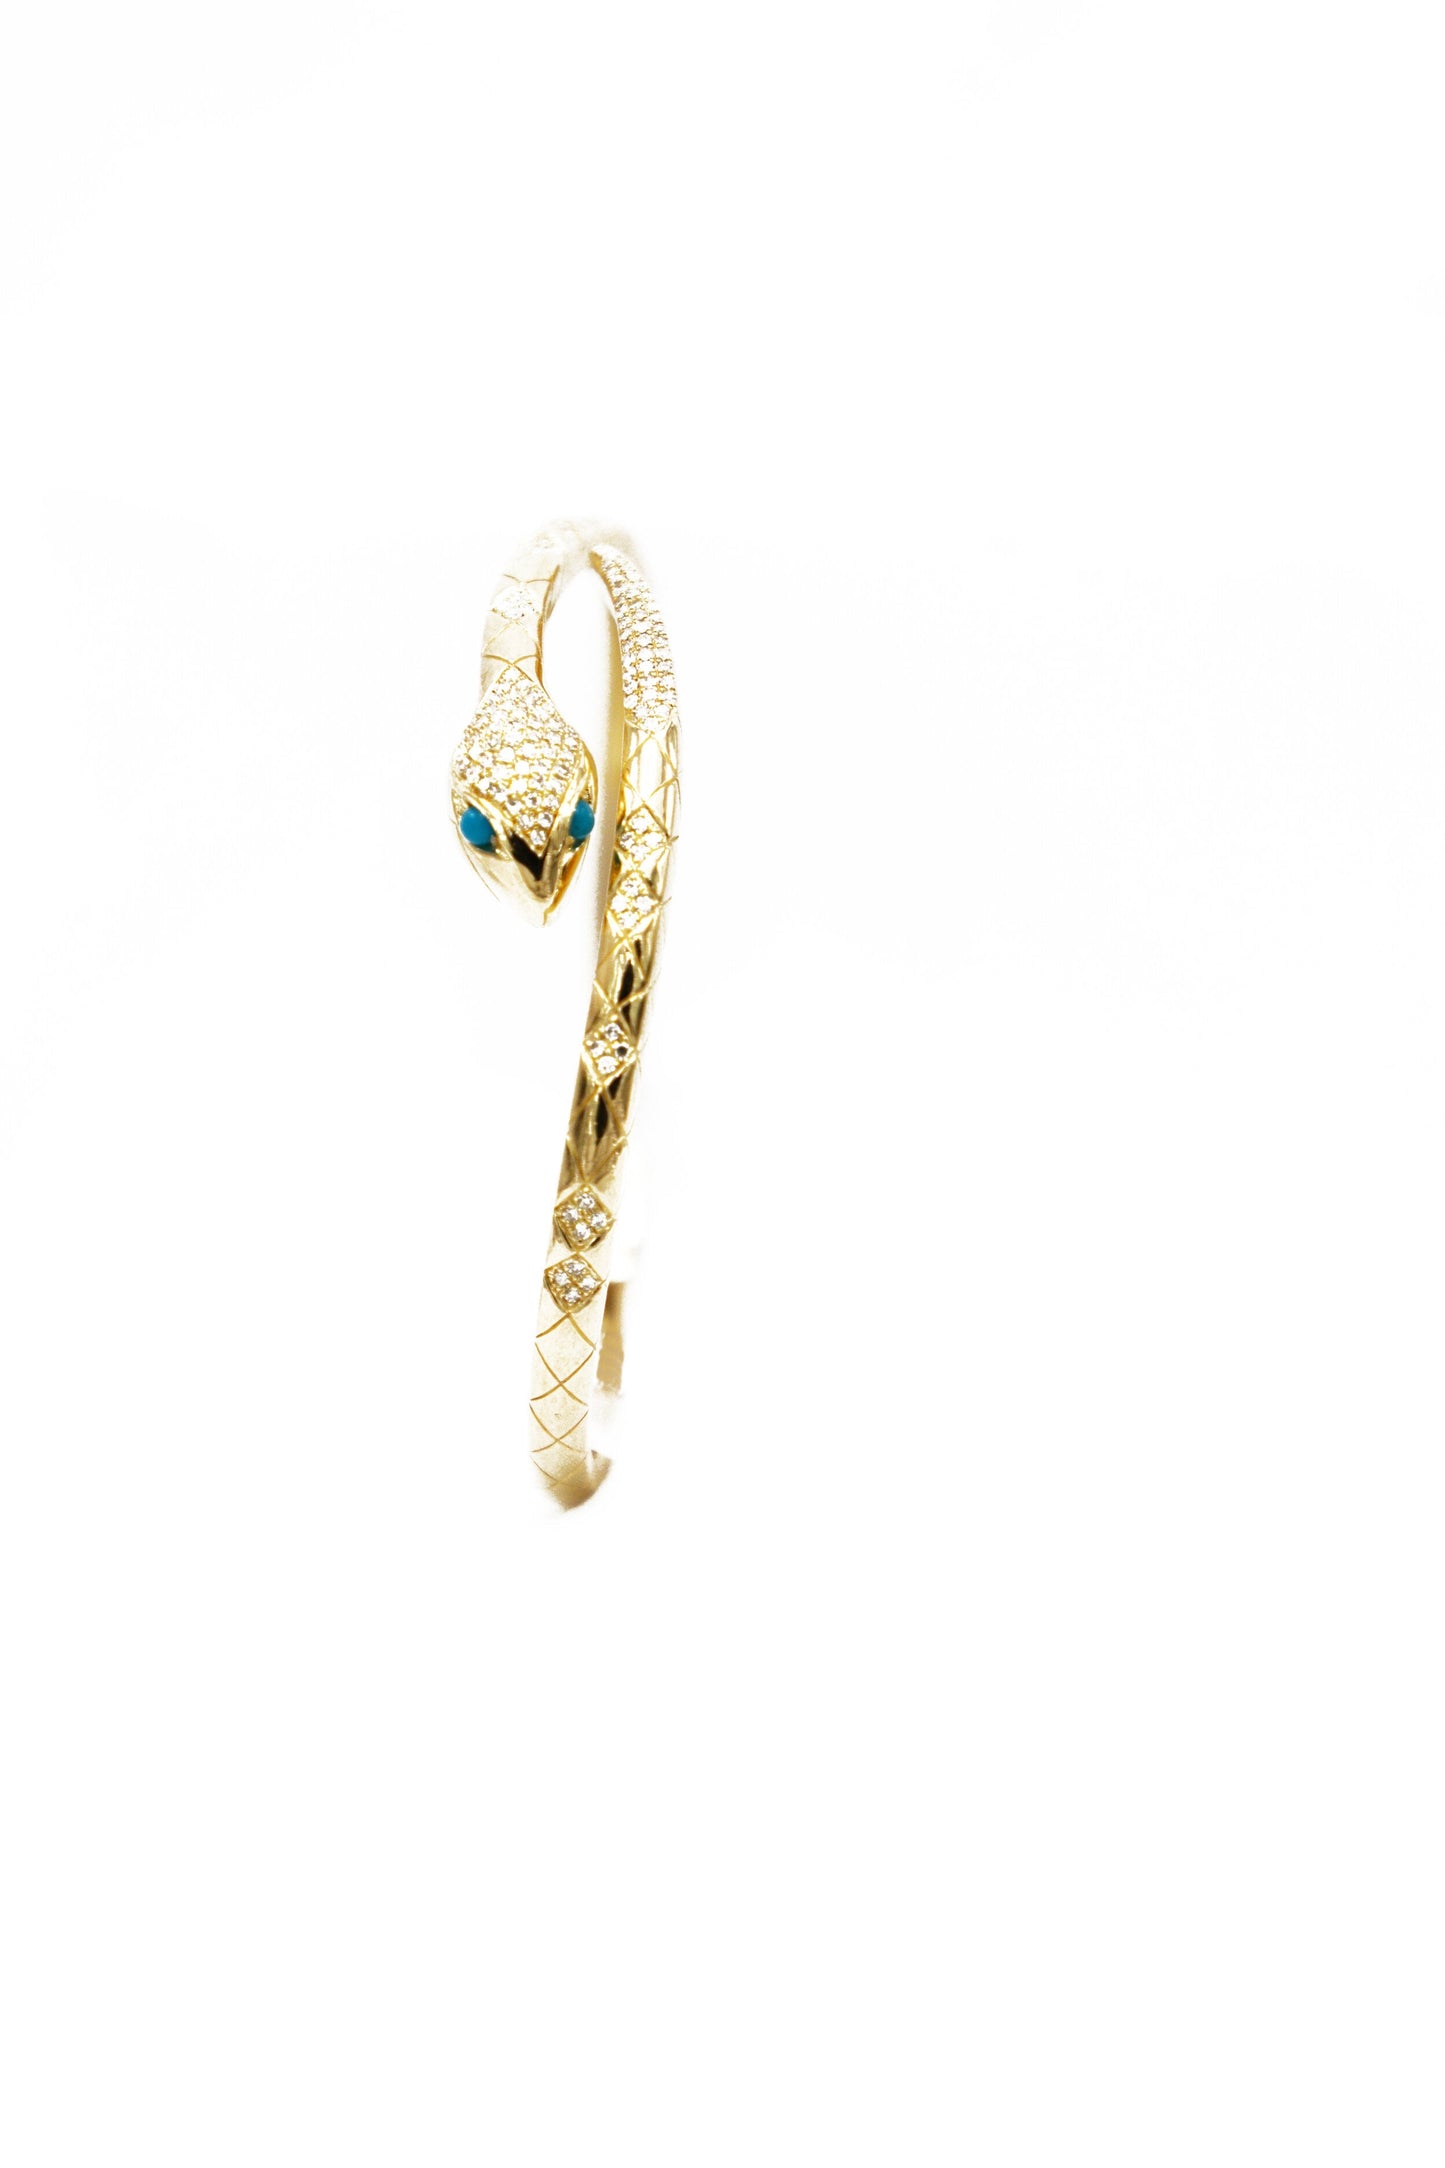 14k Yellow Gold, Diamond Pave and Turquoise Snake Bracelet